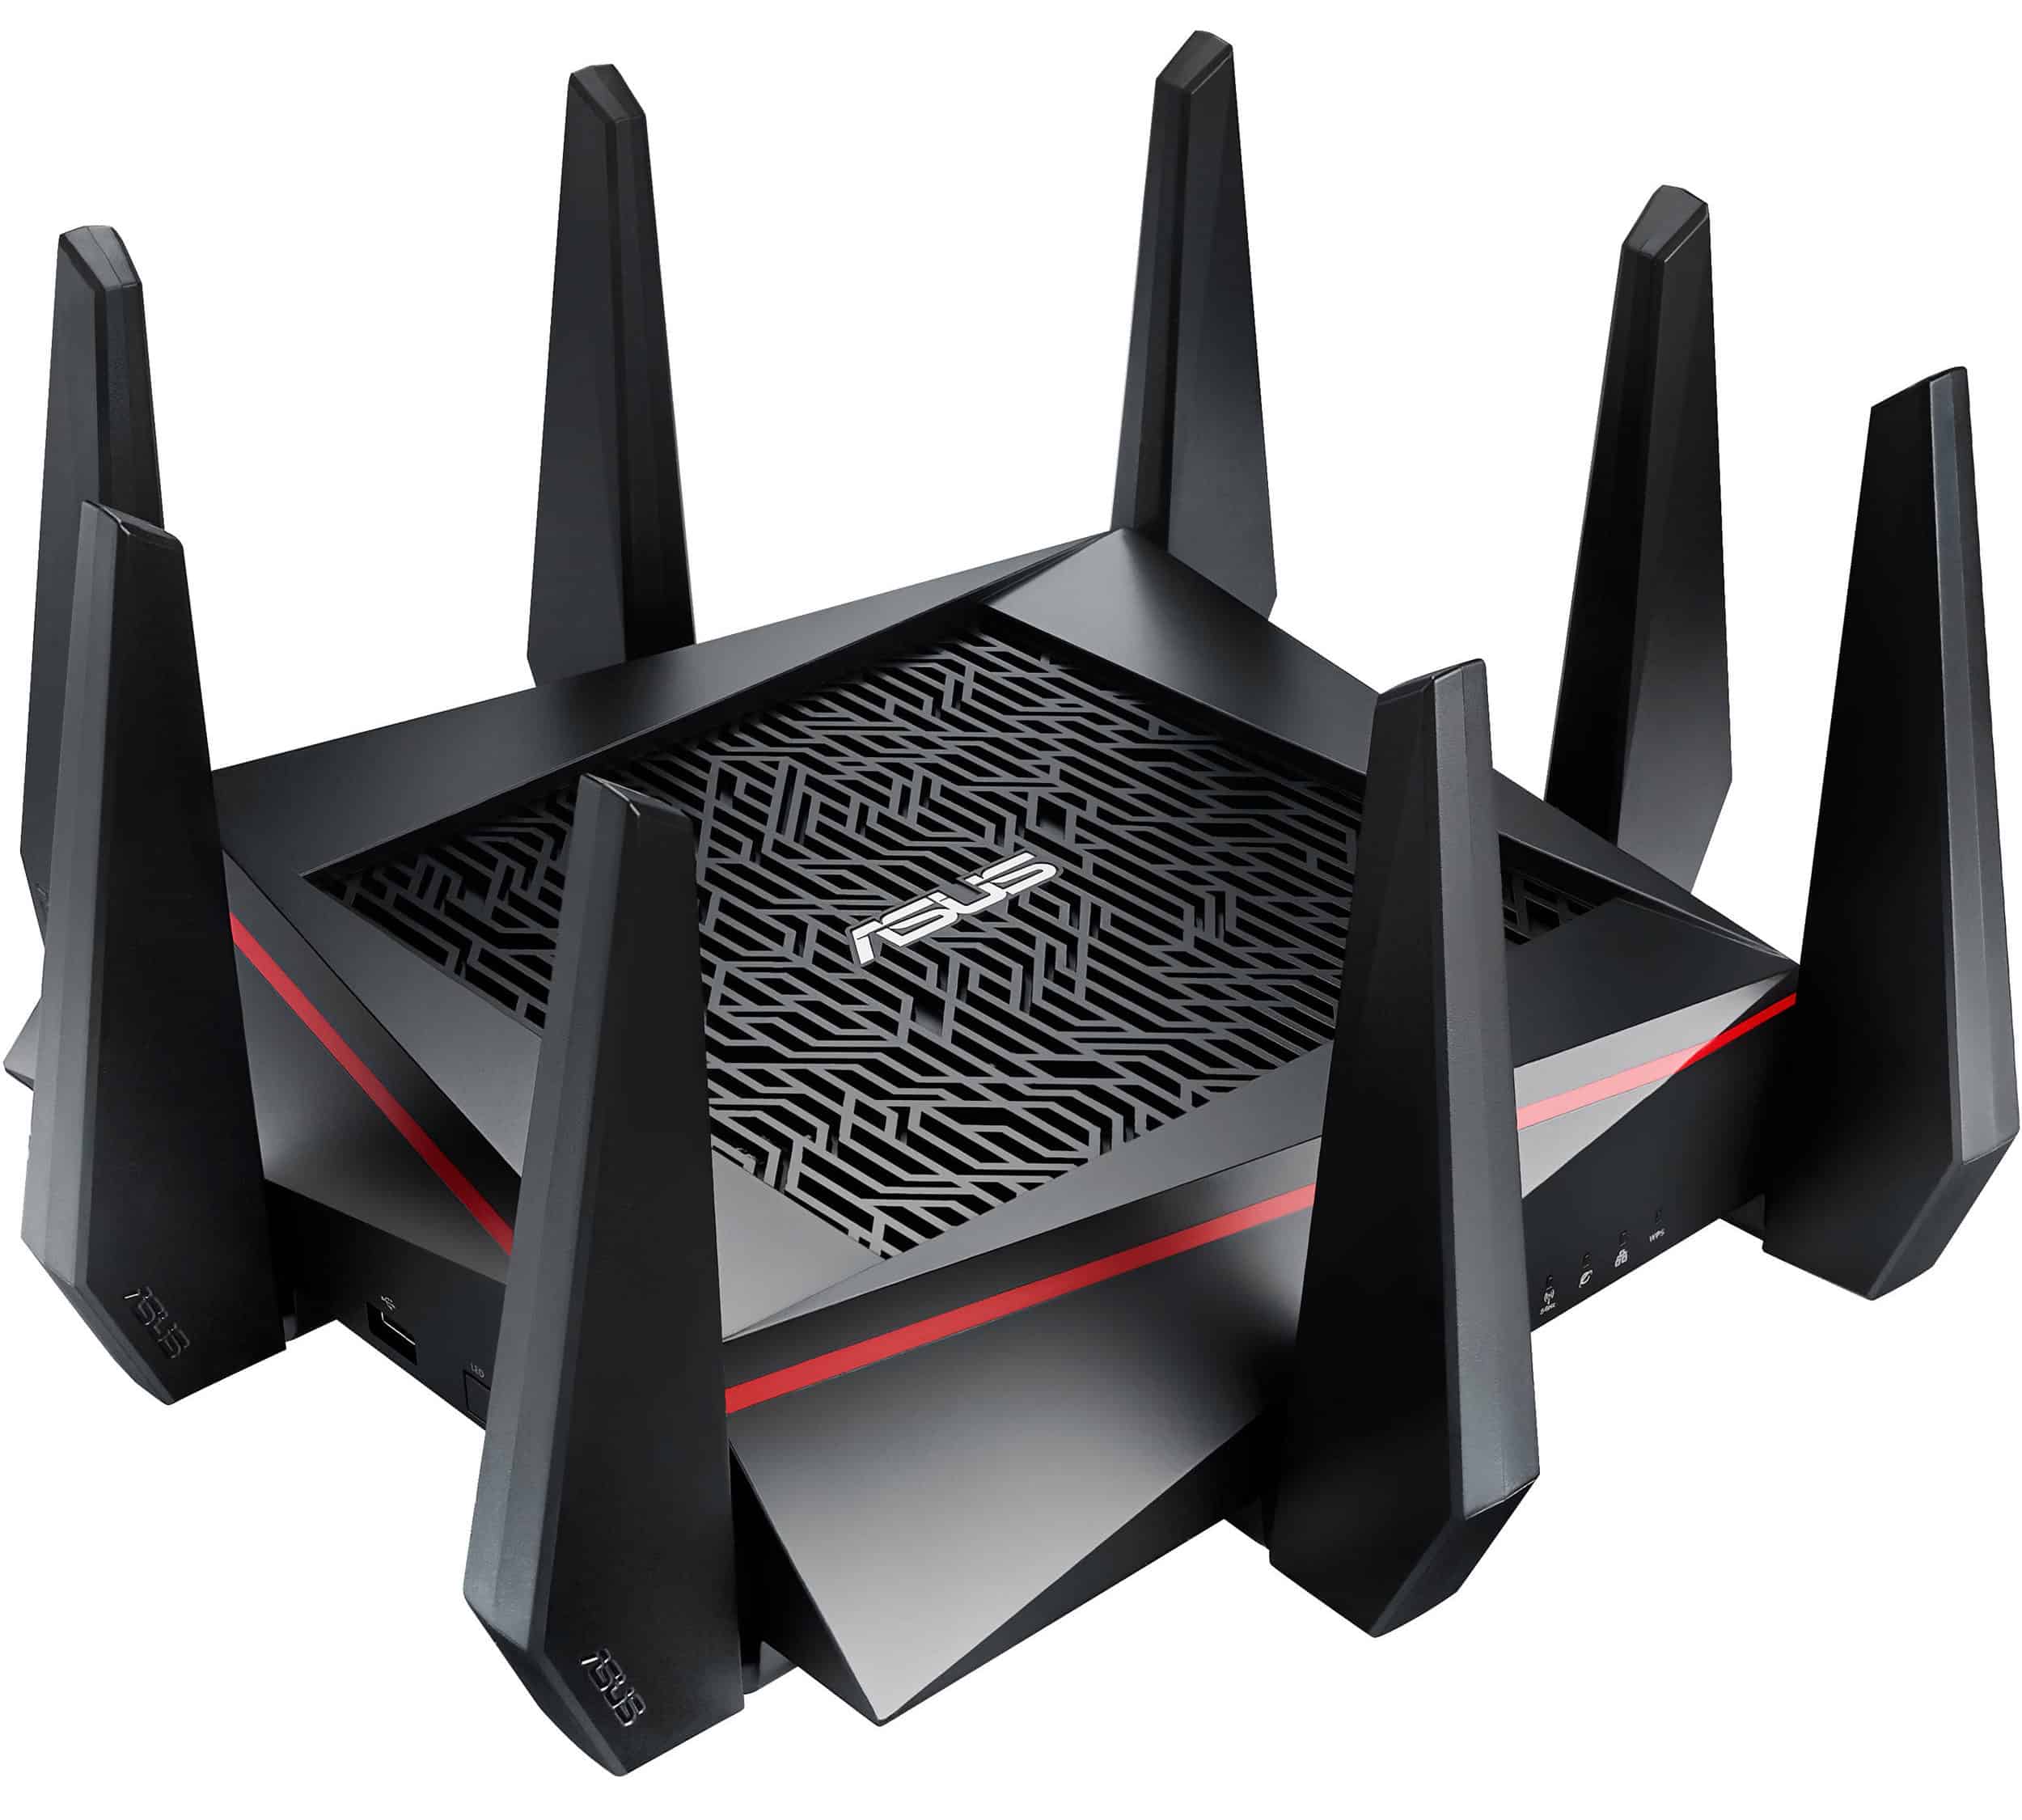 ASUS RT AC5300 Gaming Router